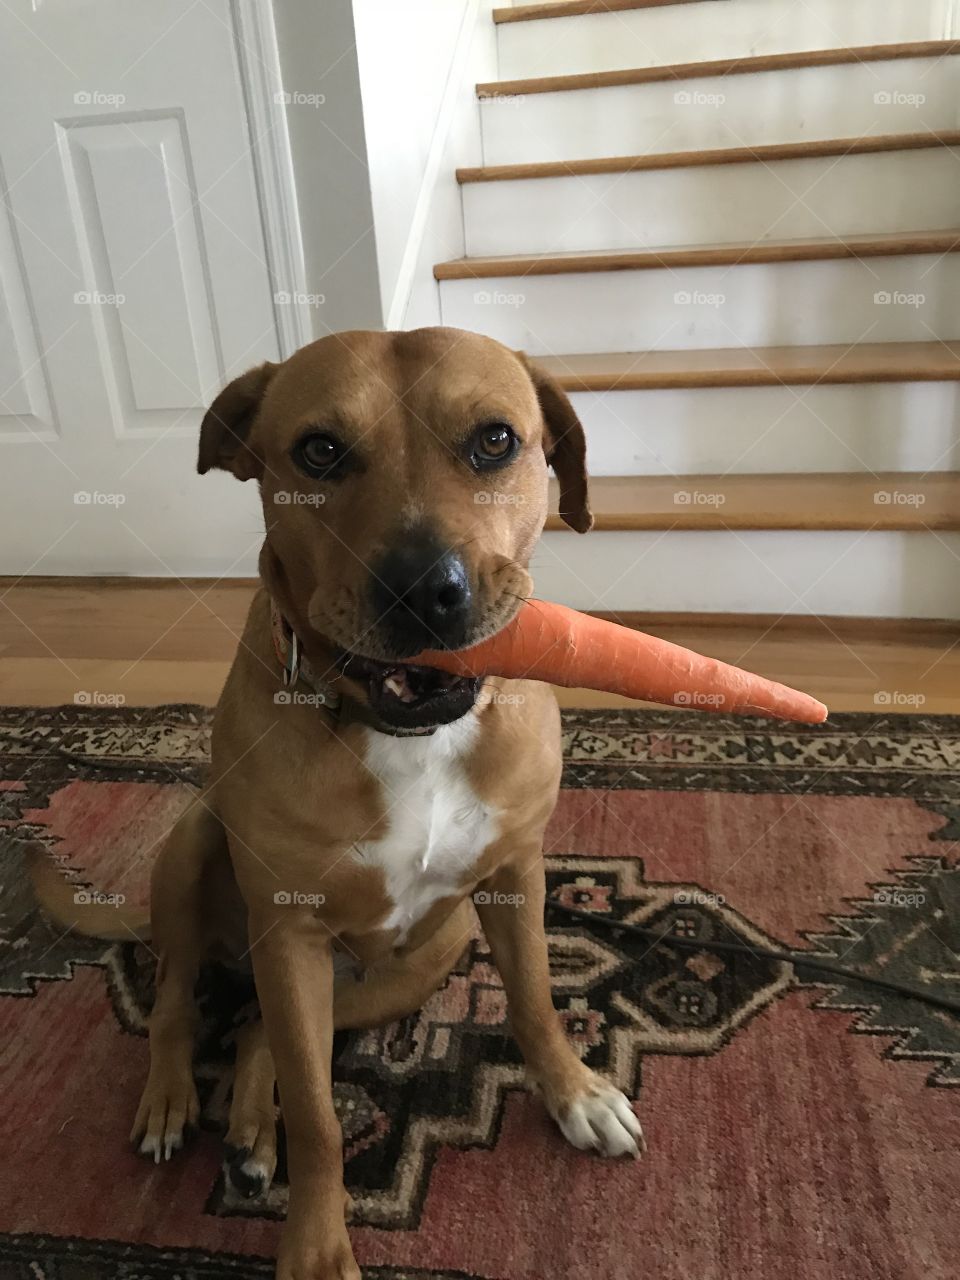 Dog with carrot